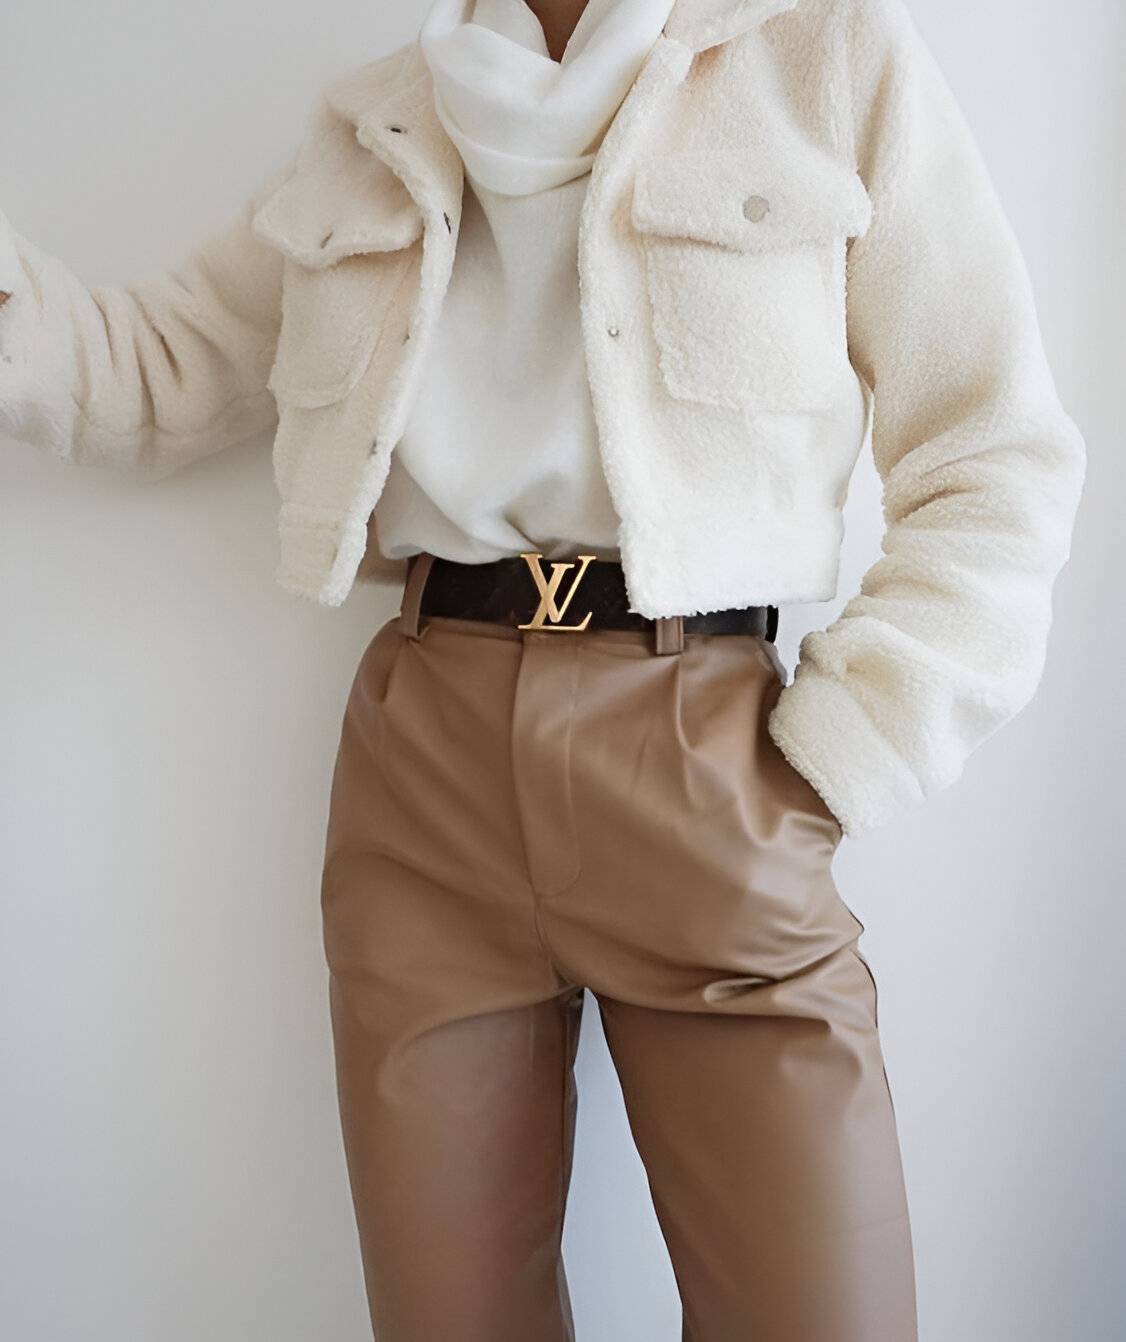 22 Chic Ways To Wear Beige Outfits Like A Runway Model